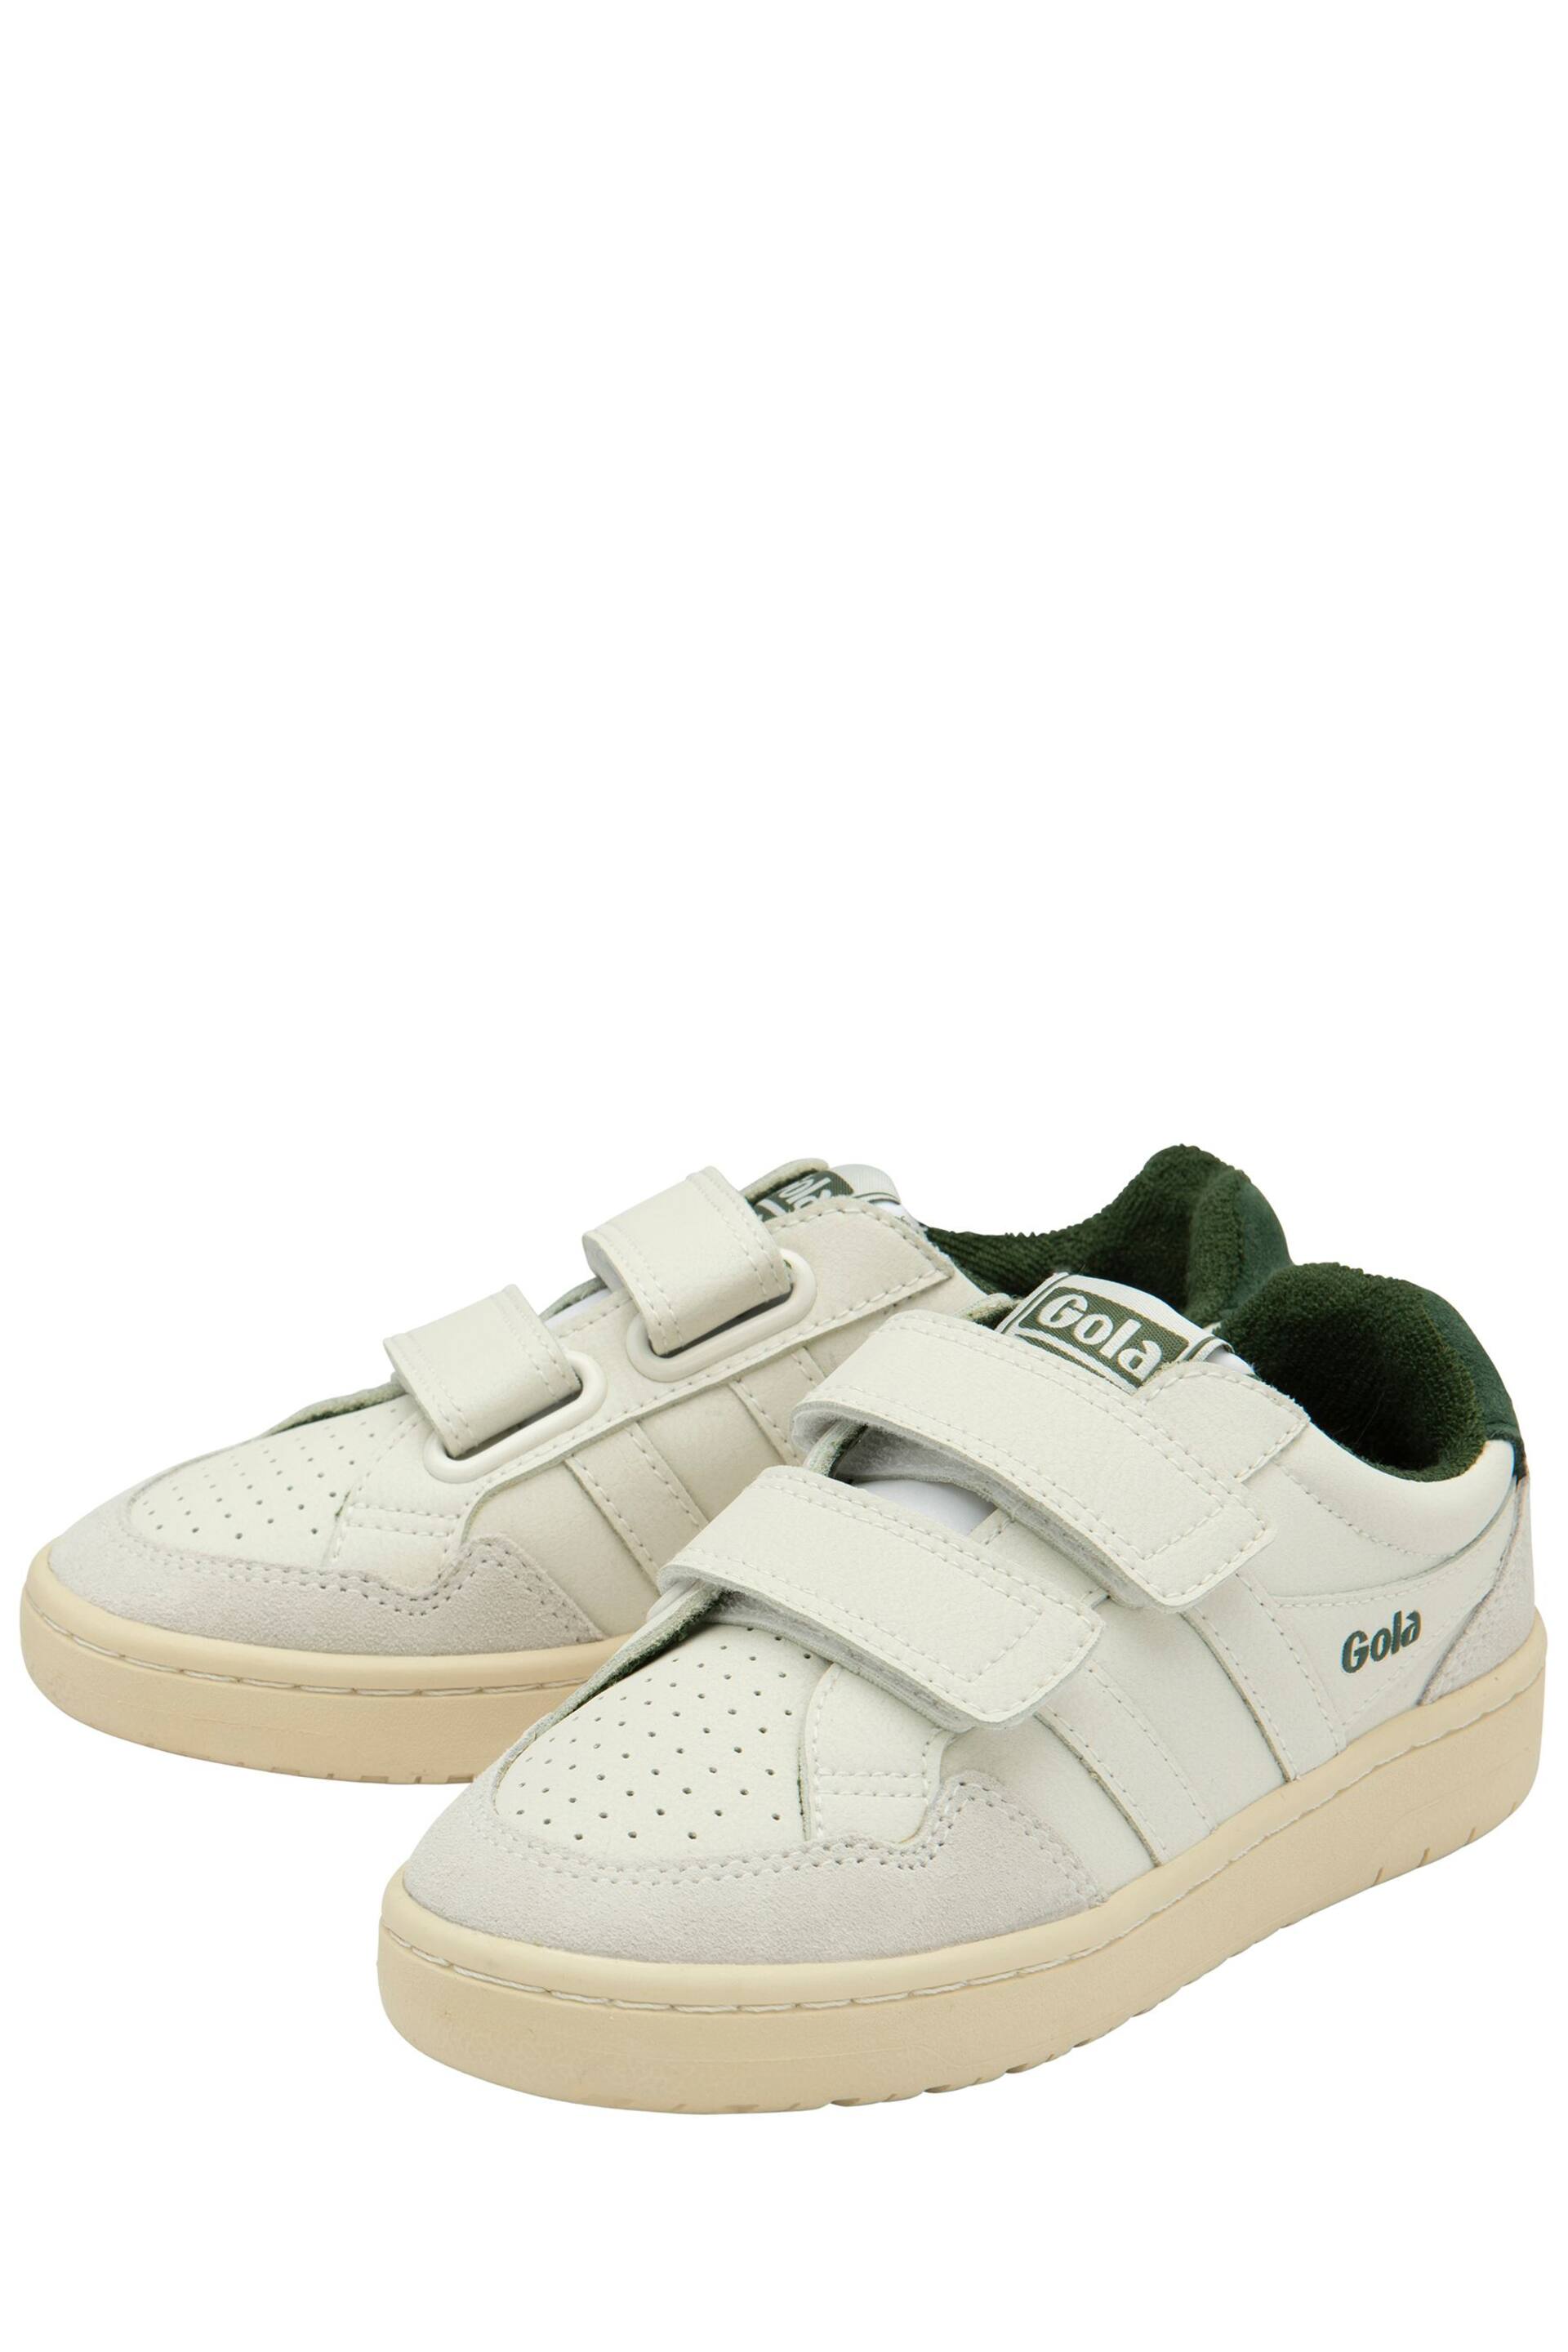 Gola Off White/Evergreen Kids Eagle Strap Trainers - Image 2 of 4